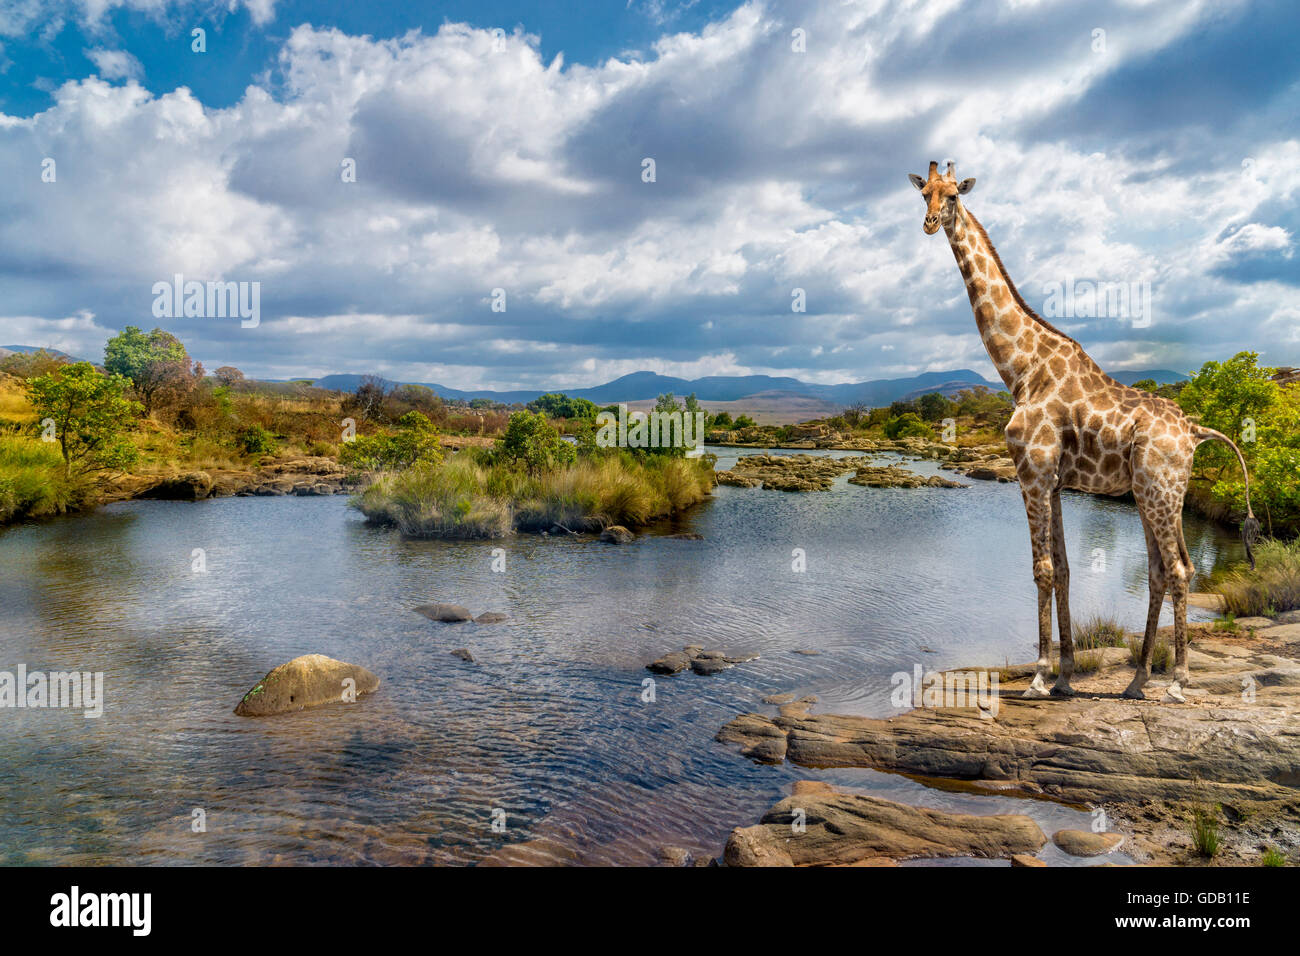 Picturesque shot of a giraffe, standing at the river bank. Stock Photo